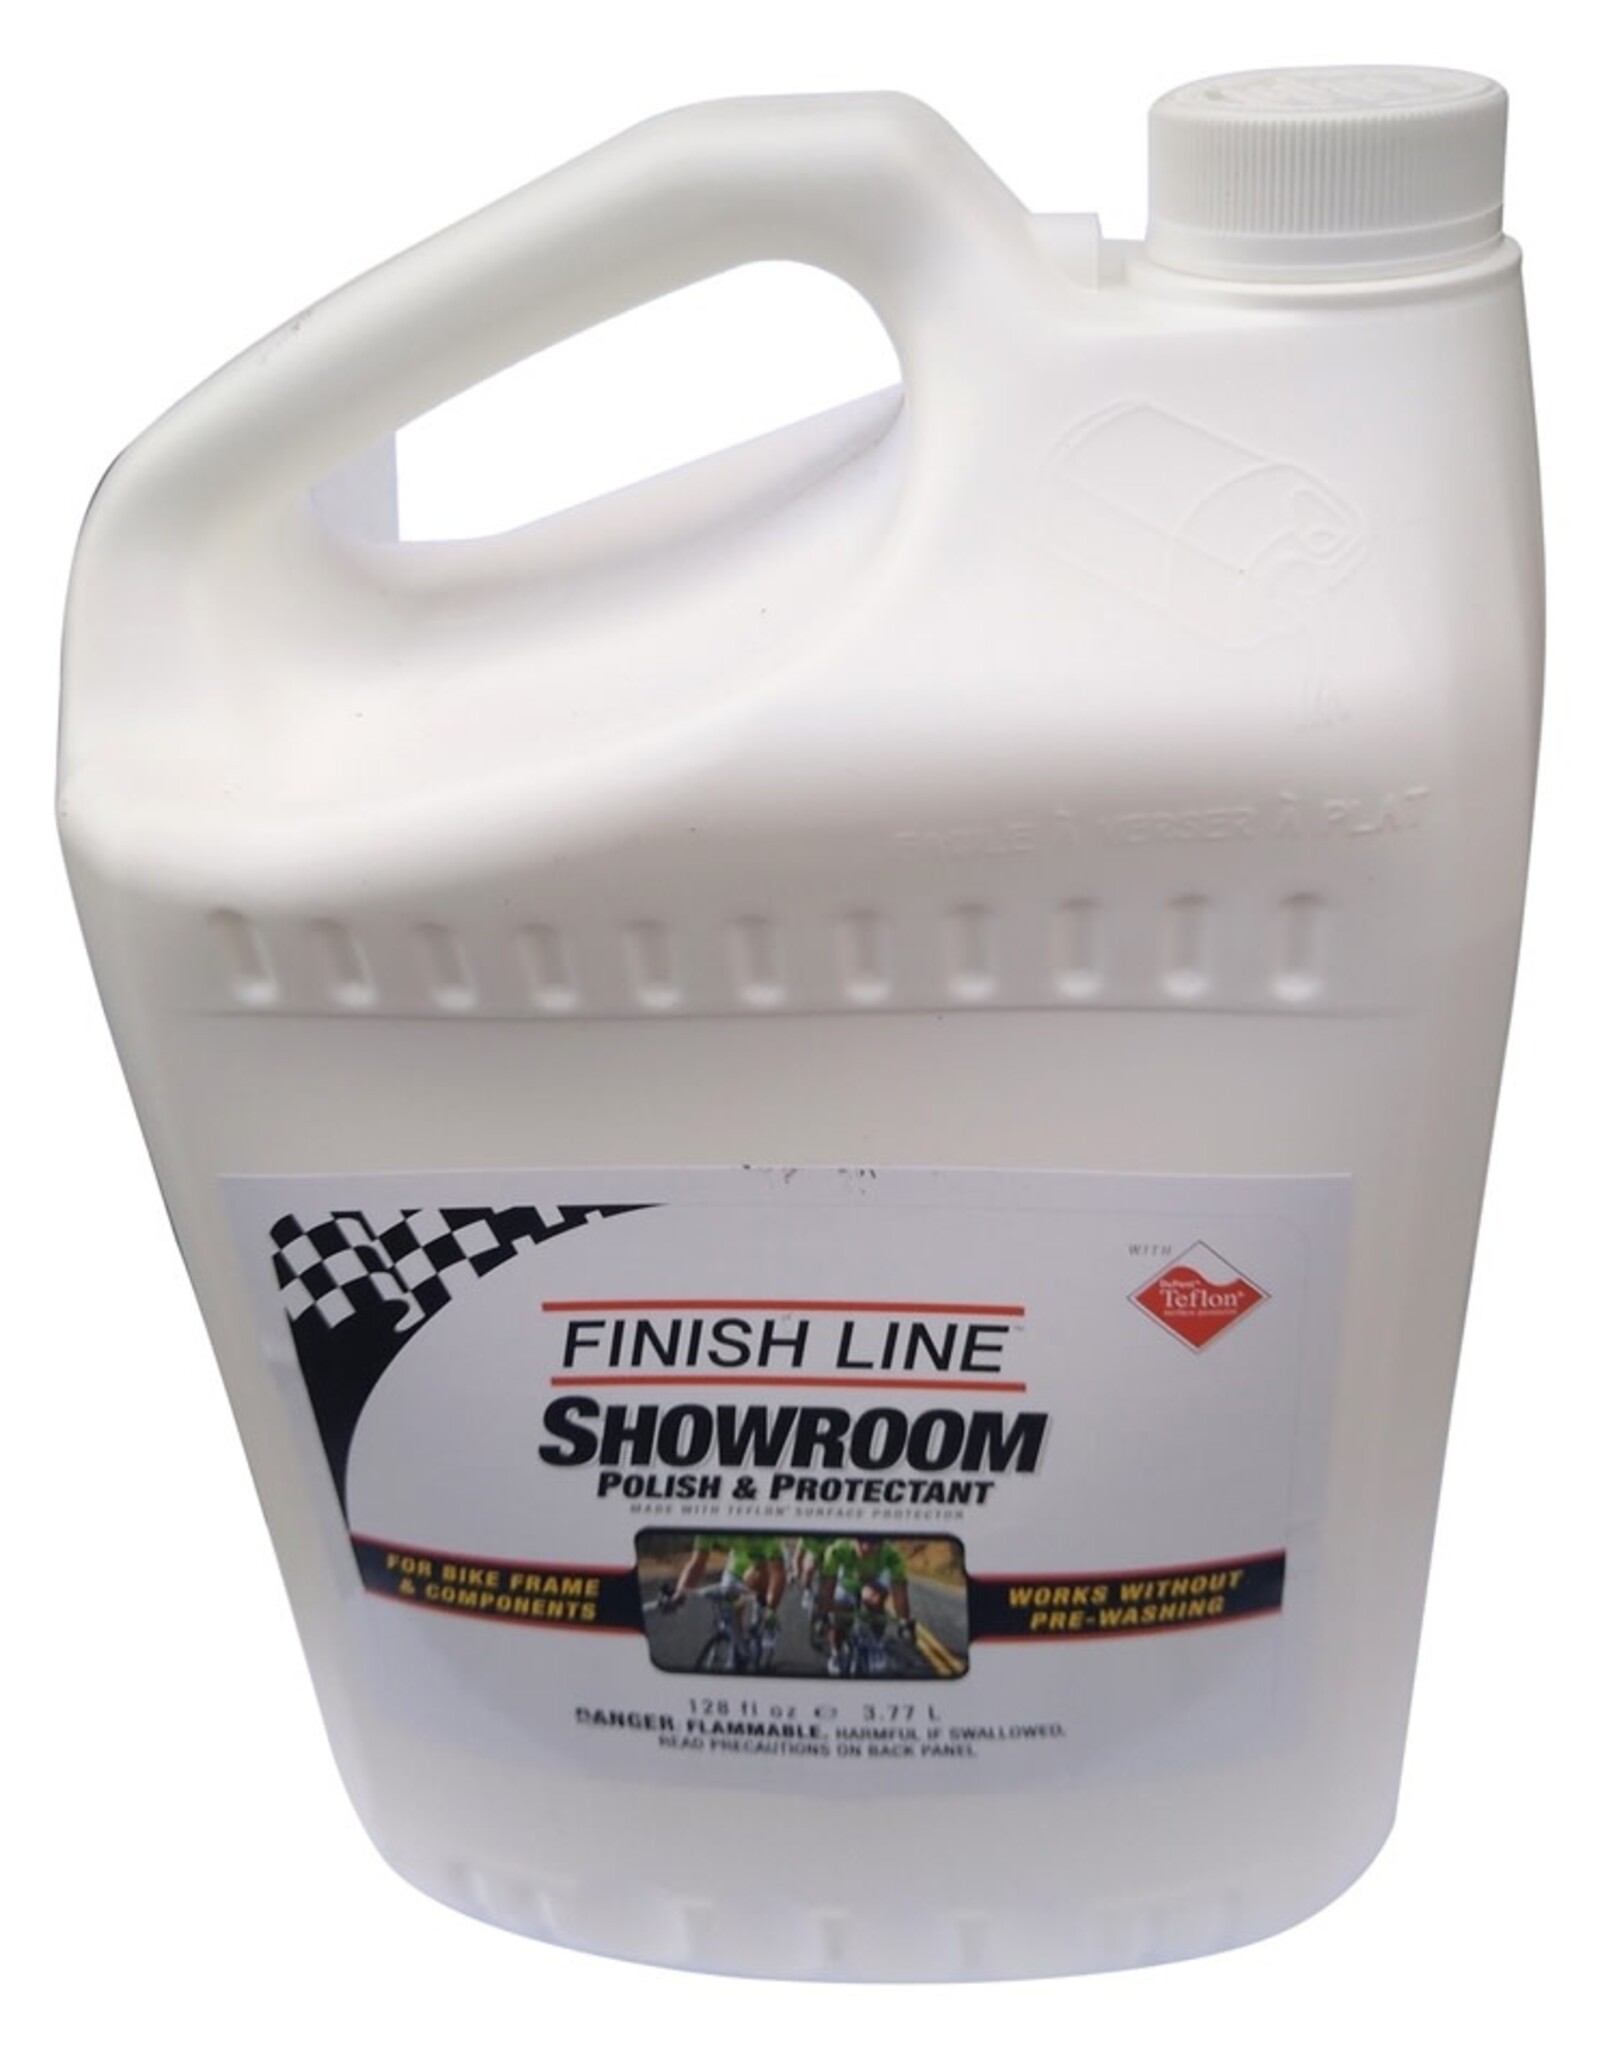 Finish Line Finish Line Showroom Polish and Protectant with Ceramic Technology - 1 Gallon